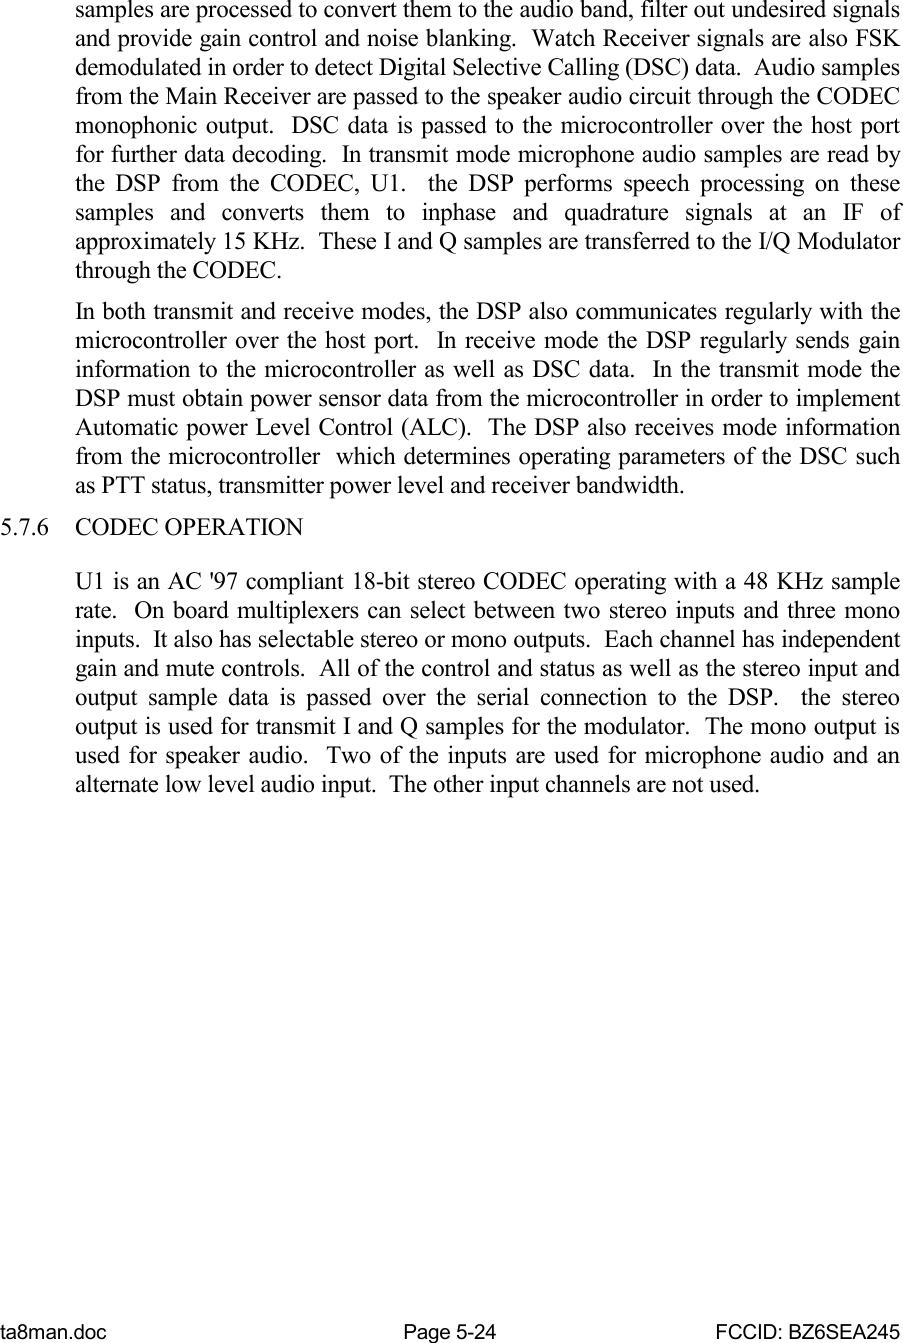 ta8man.doc Page 5-24 FCCID: BZ6SEA245samples are processed to convert them to the audio band, filter out undesired signalsand provide gain control and noise blanking.  Watch Receiver signals are also FSKdemodulated in order to detect Digital Selective Calling (DSC) data.  Audio samplesfrom the Main Receiver are passed to the speaker audio circuit through the CODECmonophonic output.  DSC data is passed to the microcontroller over the host portfor further data decoding.  In transmit mode microphone audio samples are read bythe DSP from the CODEC, U1.  the DSP performs speech processing on thesesamples and converts them to inphase and quadrature signals at an IF ofapproximately 15 KHz.  These I and Q samples are transferred to the I/Q Modulatorthrough the CODEC.In both transmit and receive modes, the DSP also communicates regularly with themicrocontroller over the host port.  In receive mode the DSP regularly sends gaininformation to the microcontroller as well as DSC data.  In the transmit mode theDSP must obtain power sensor data from the microcontroller in order to implementAutomatic power Level Control (ALC).  The DSP also receives mode informationfrom the microcontroller  which determines operating parameters of the DSC suchas PTT status, transmitter power level and receiver bandwidth.5.7.6 CODEC OPERATIONU1 is an AC &apos;97 compliant 18-bit stereo CODEC operating with a 48 KHz samplerate.  On board multiplexers can select between two stereo inputs and three monoinputs.  It also has selectable stereo or mono outputs.  Each channel has independentgain and mute controls.  All of the control and status as well as the stereo input andoutput sample data is passed over the serial connection to the DSP.  the stereooutput is used for transmit I and Q samples for the modulator.  The mono output isused for speaker audio.  Two of the inputs are used for microphone audio and analternate low level audio input.  The other input channels are not used.